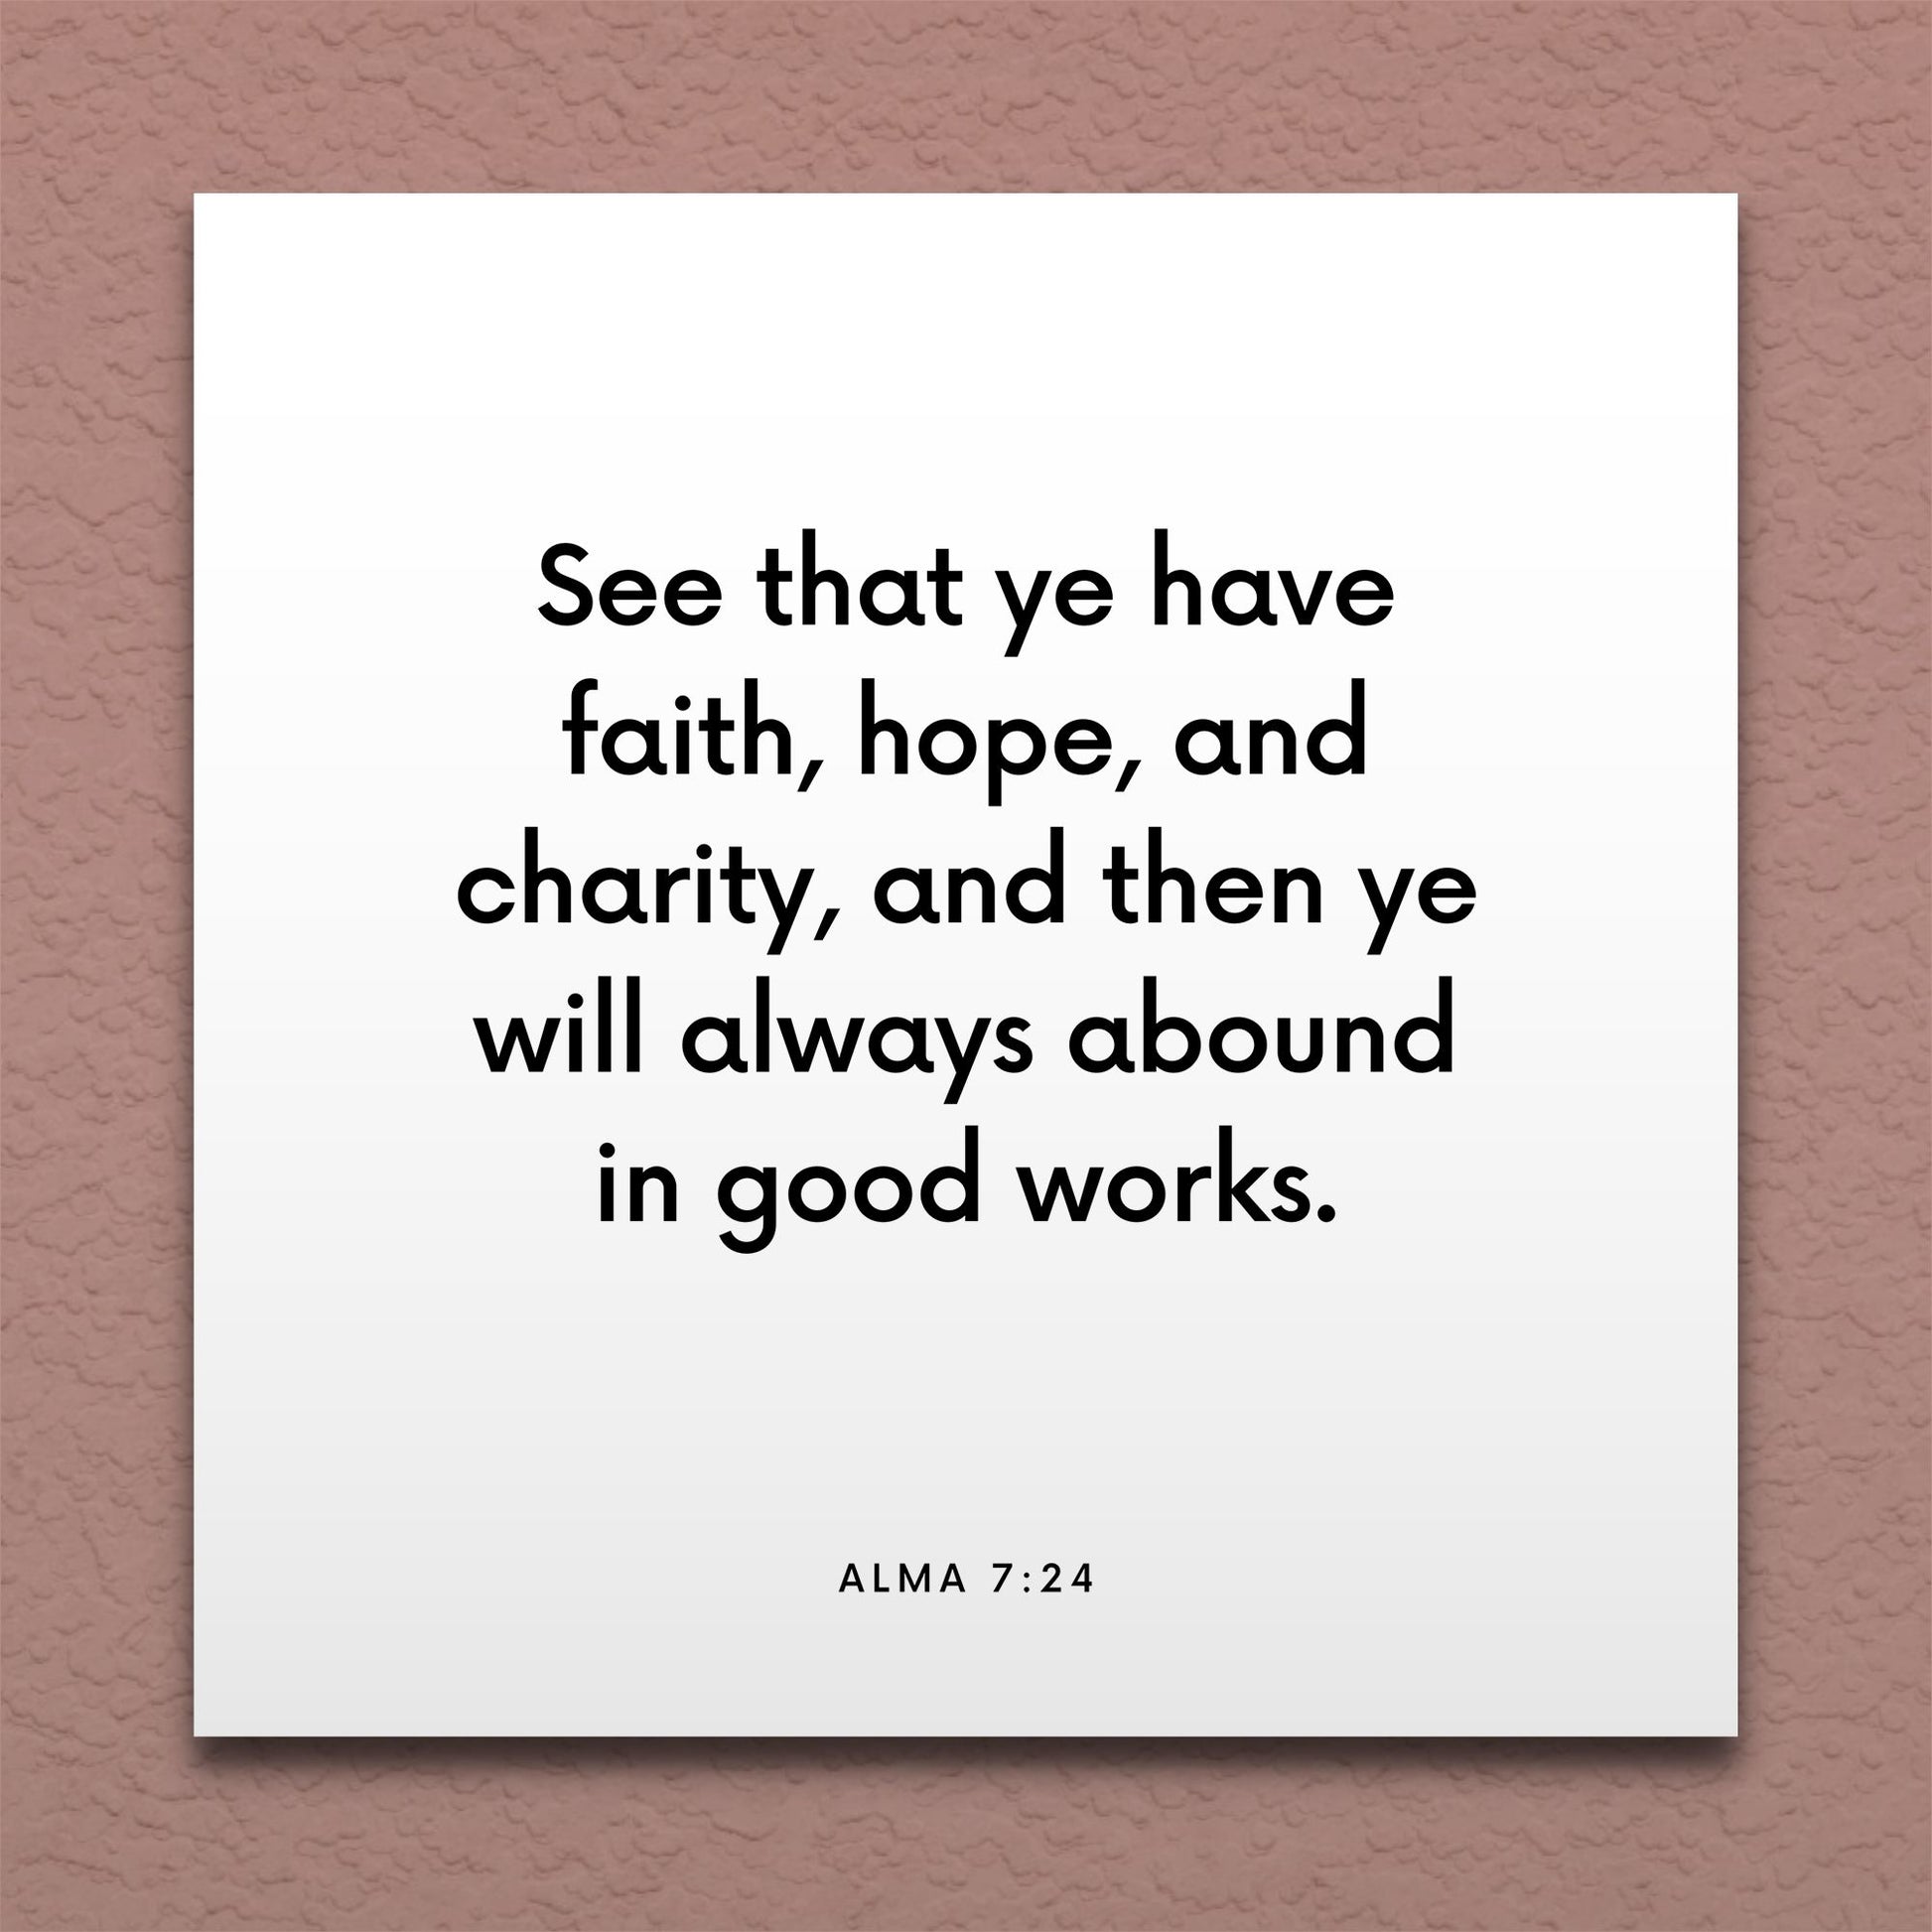 Wall-mounted scripture tile for Alma 7:24 - "See that ye have faith, hope, and charity"